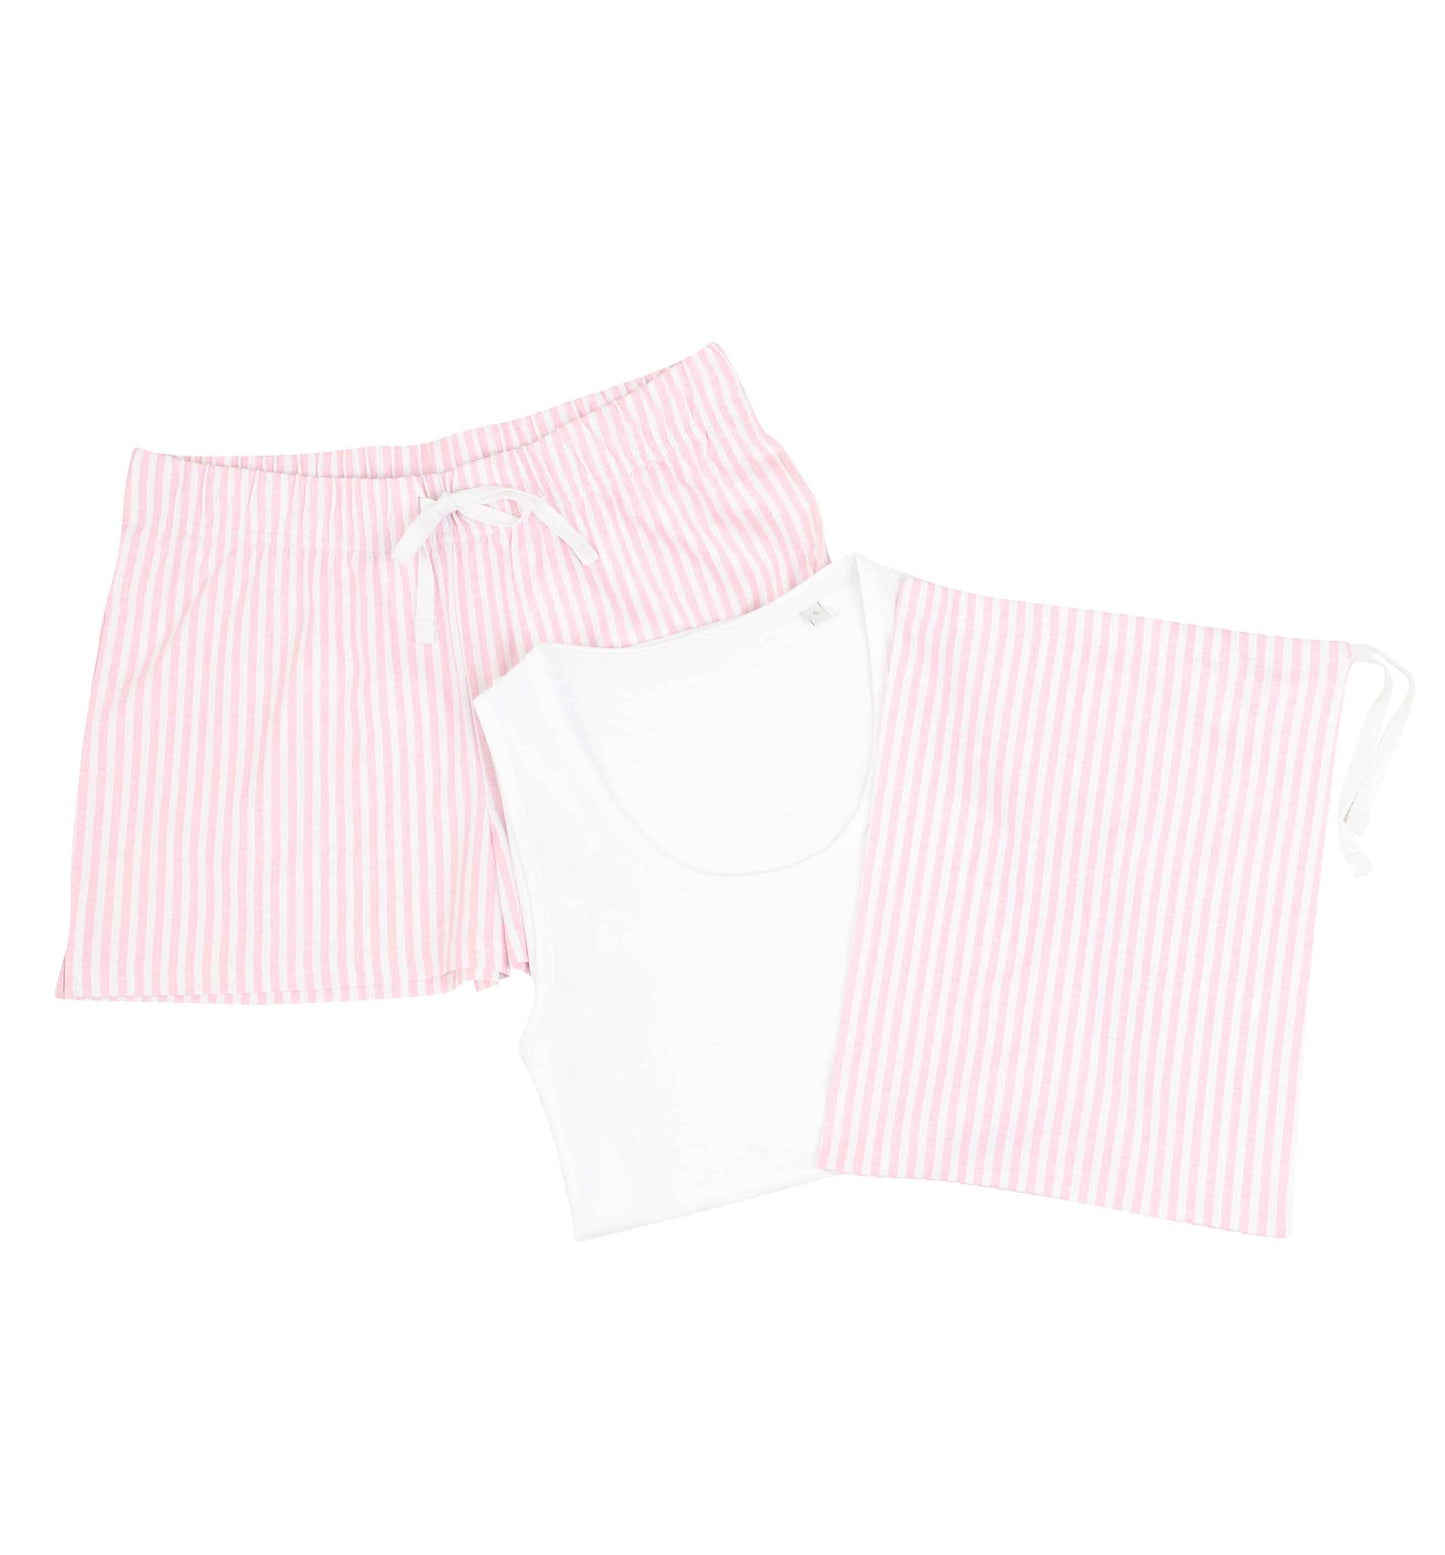 Don't worry I have everything under complete control | Pyjama shorts set